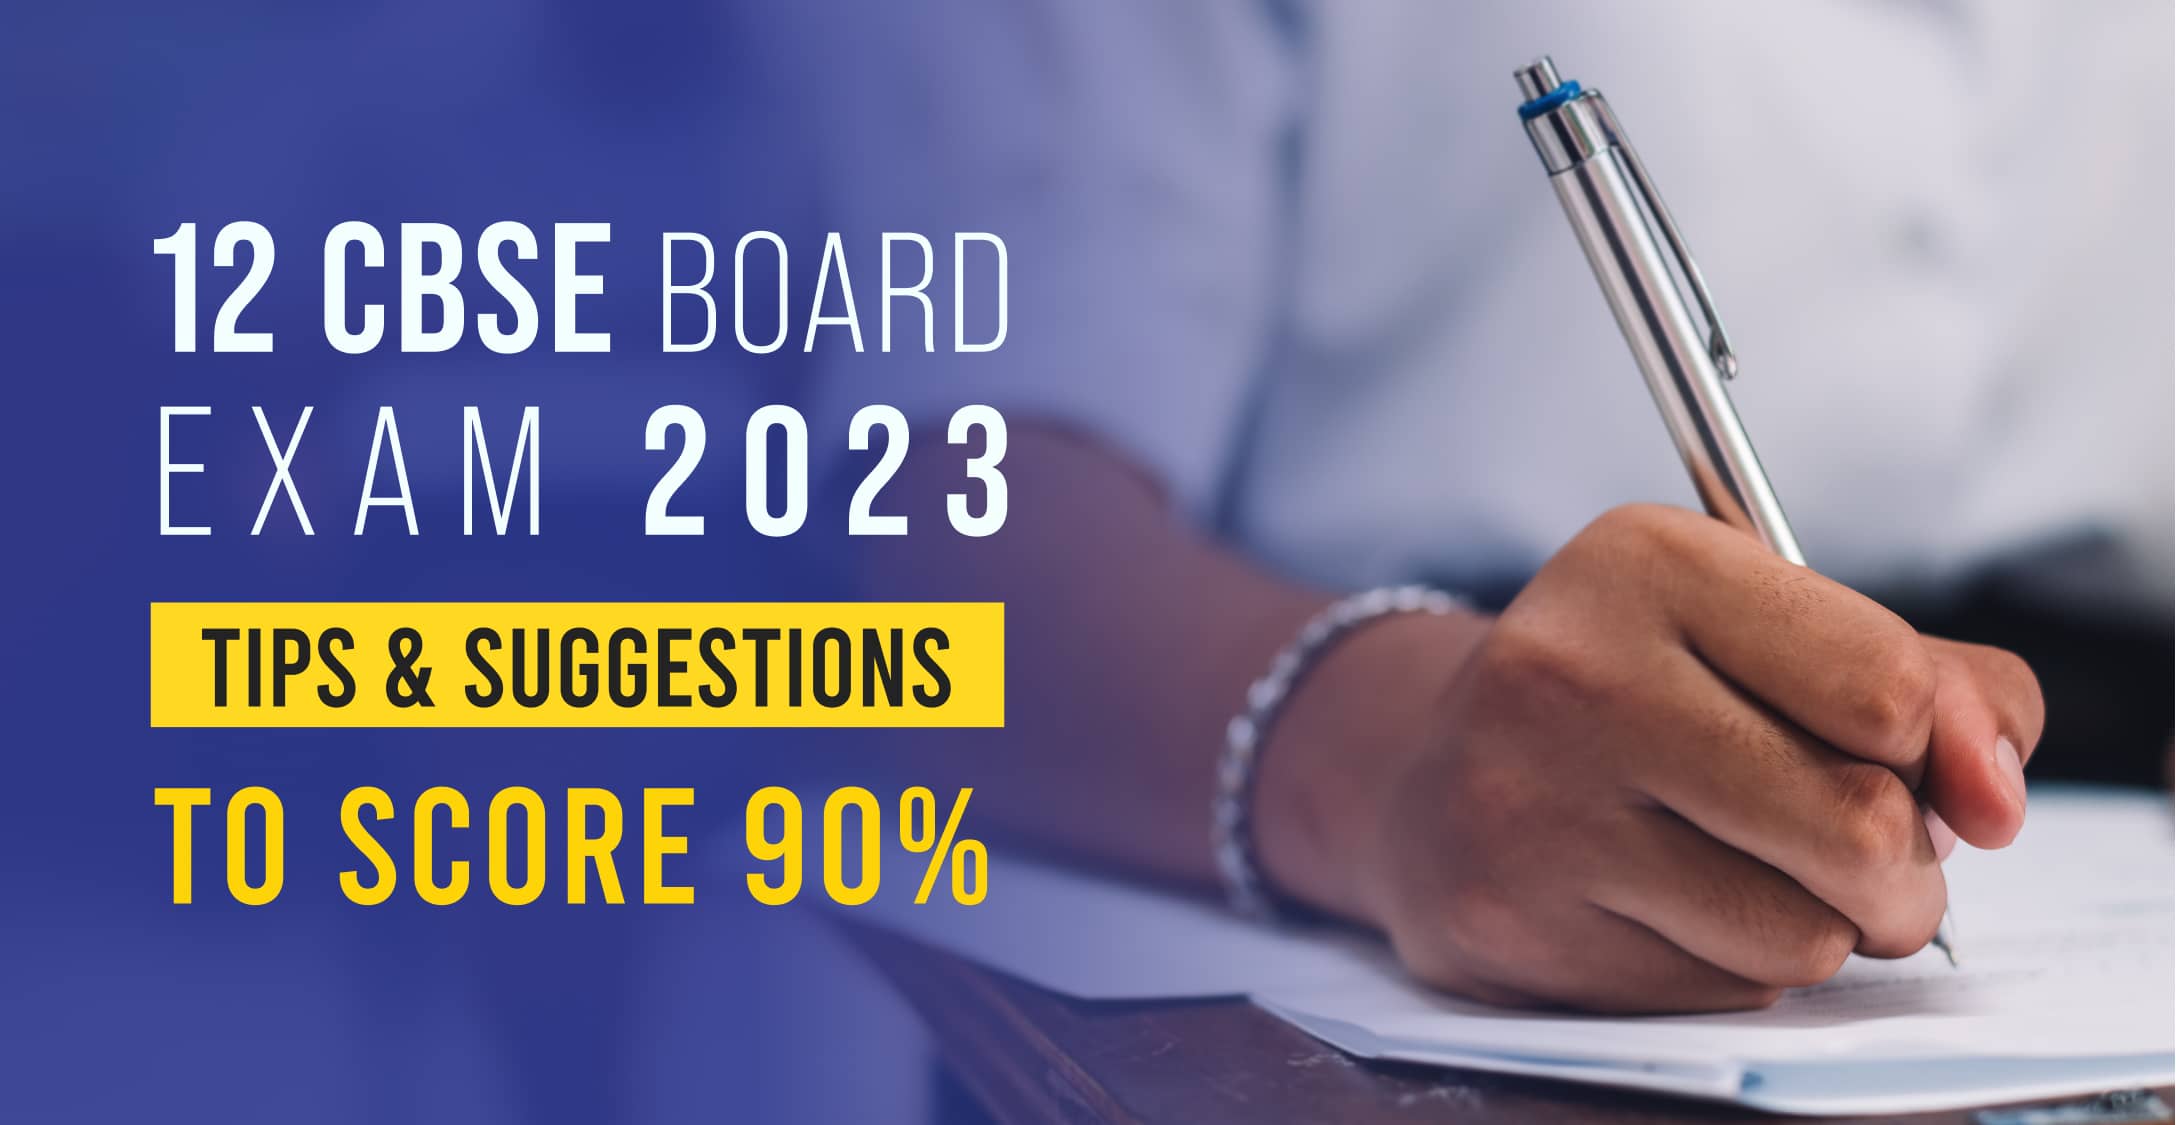 12 CBSE board exams 2023 tips and ticks feature image